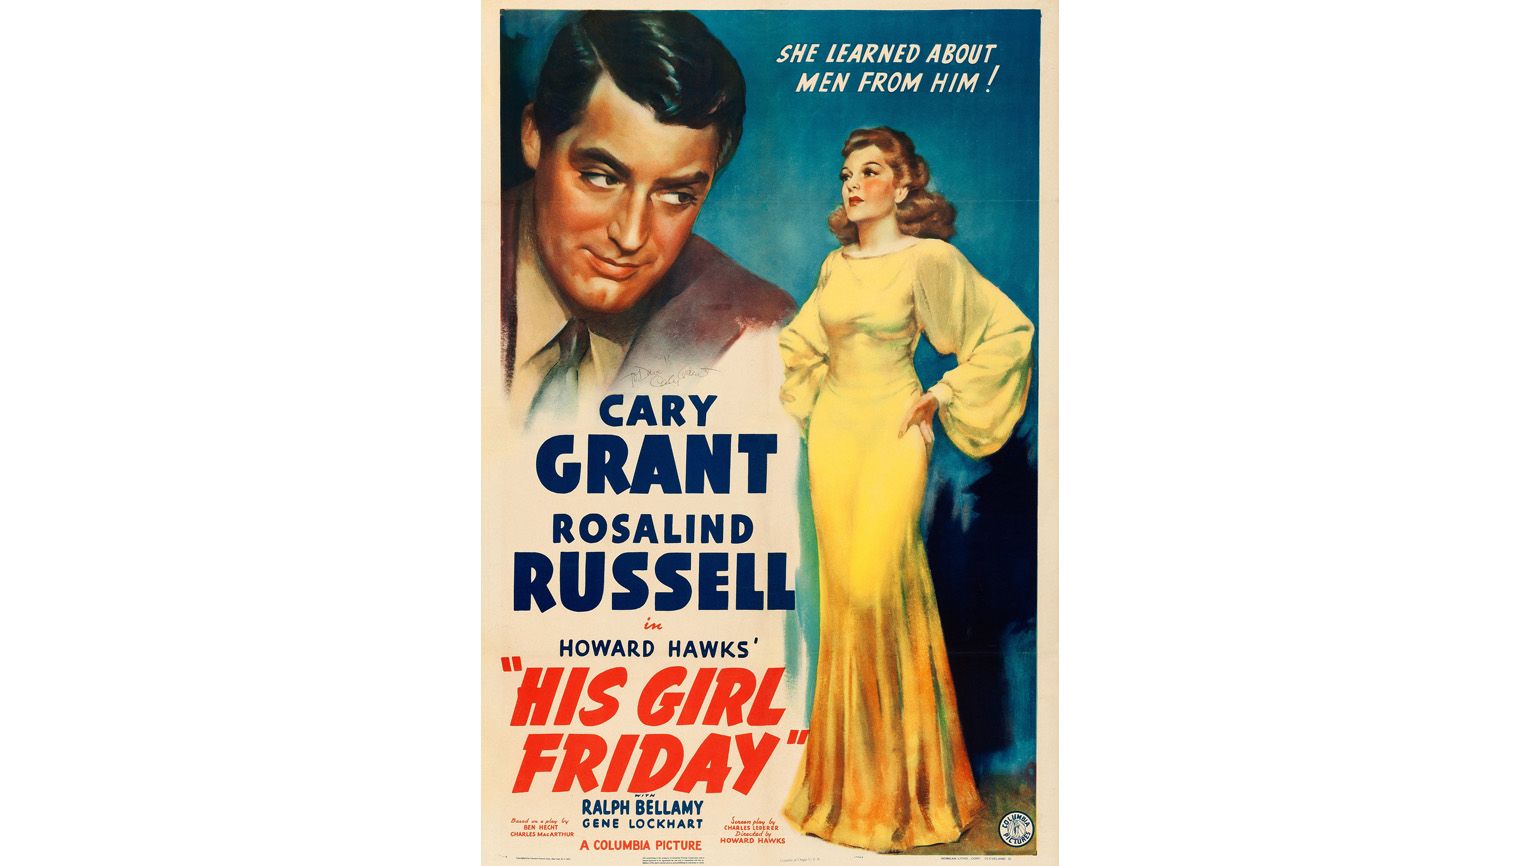 Theatrical poster for the American release of the 1940 film His Girl Friday.